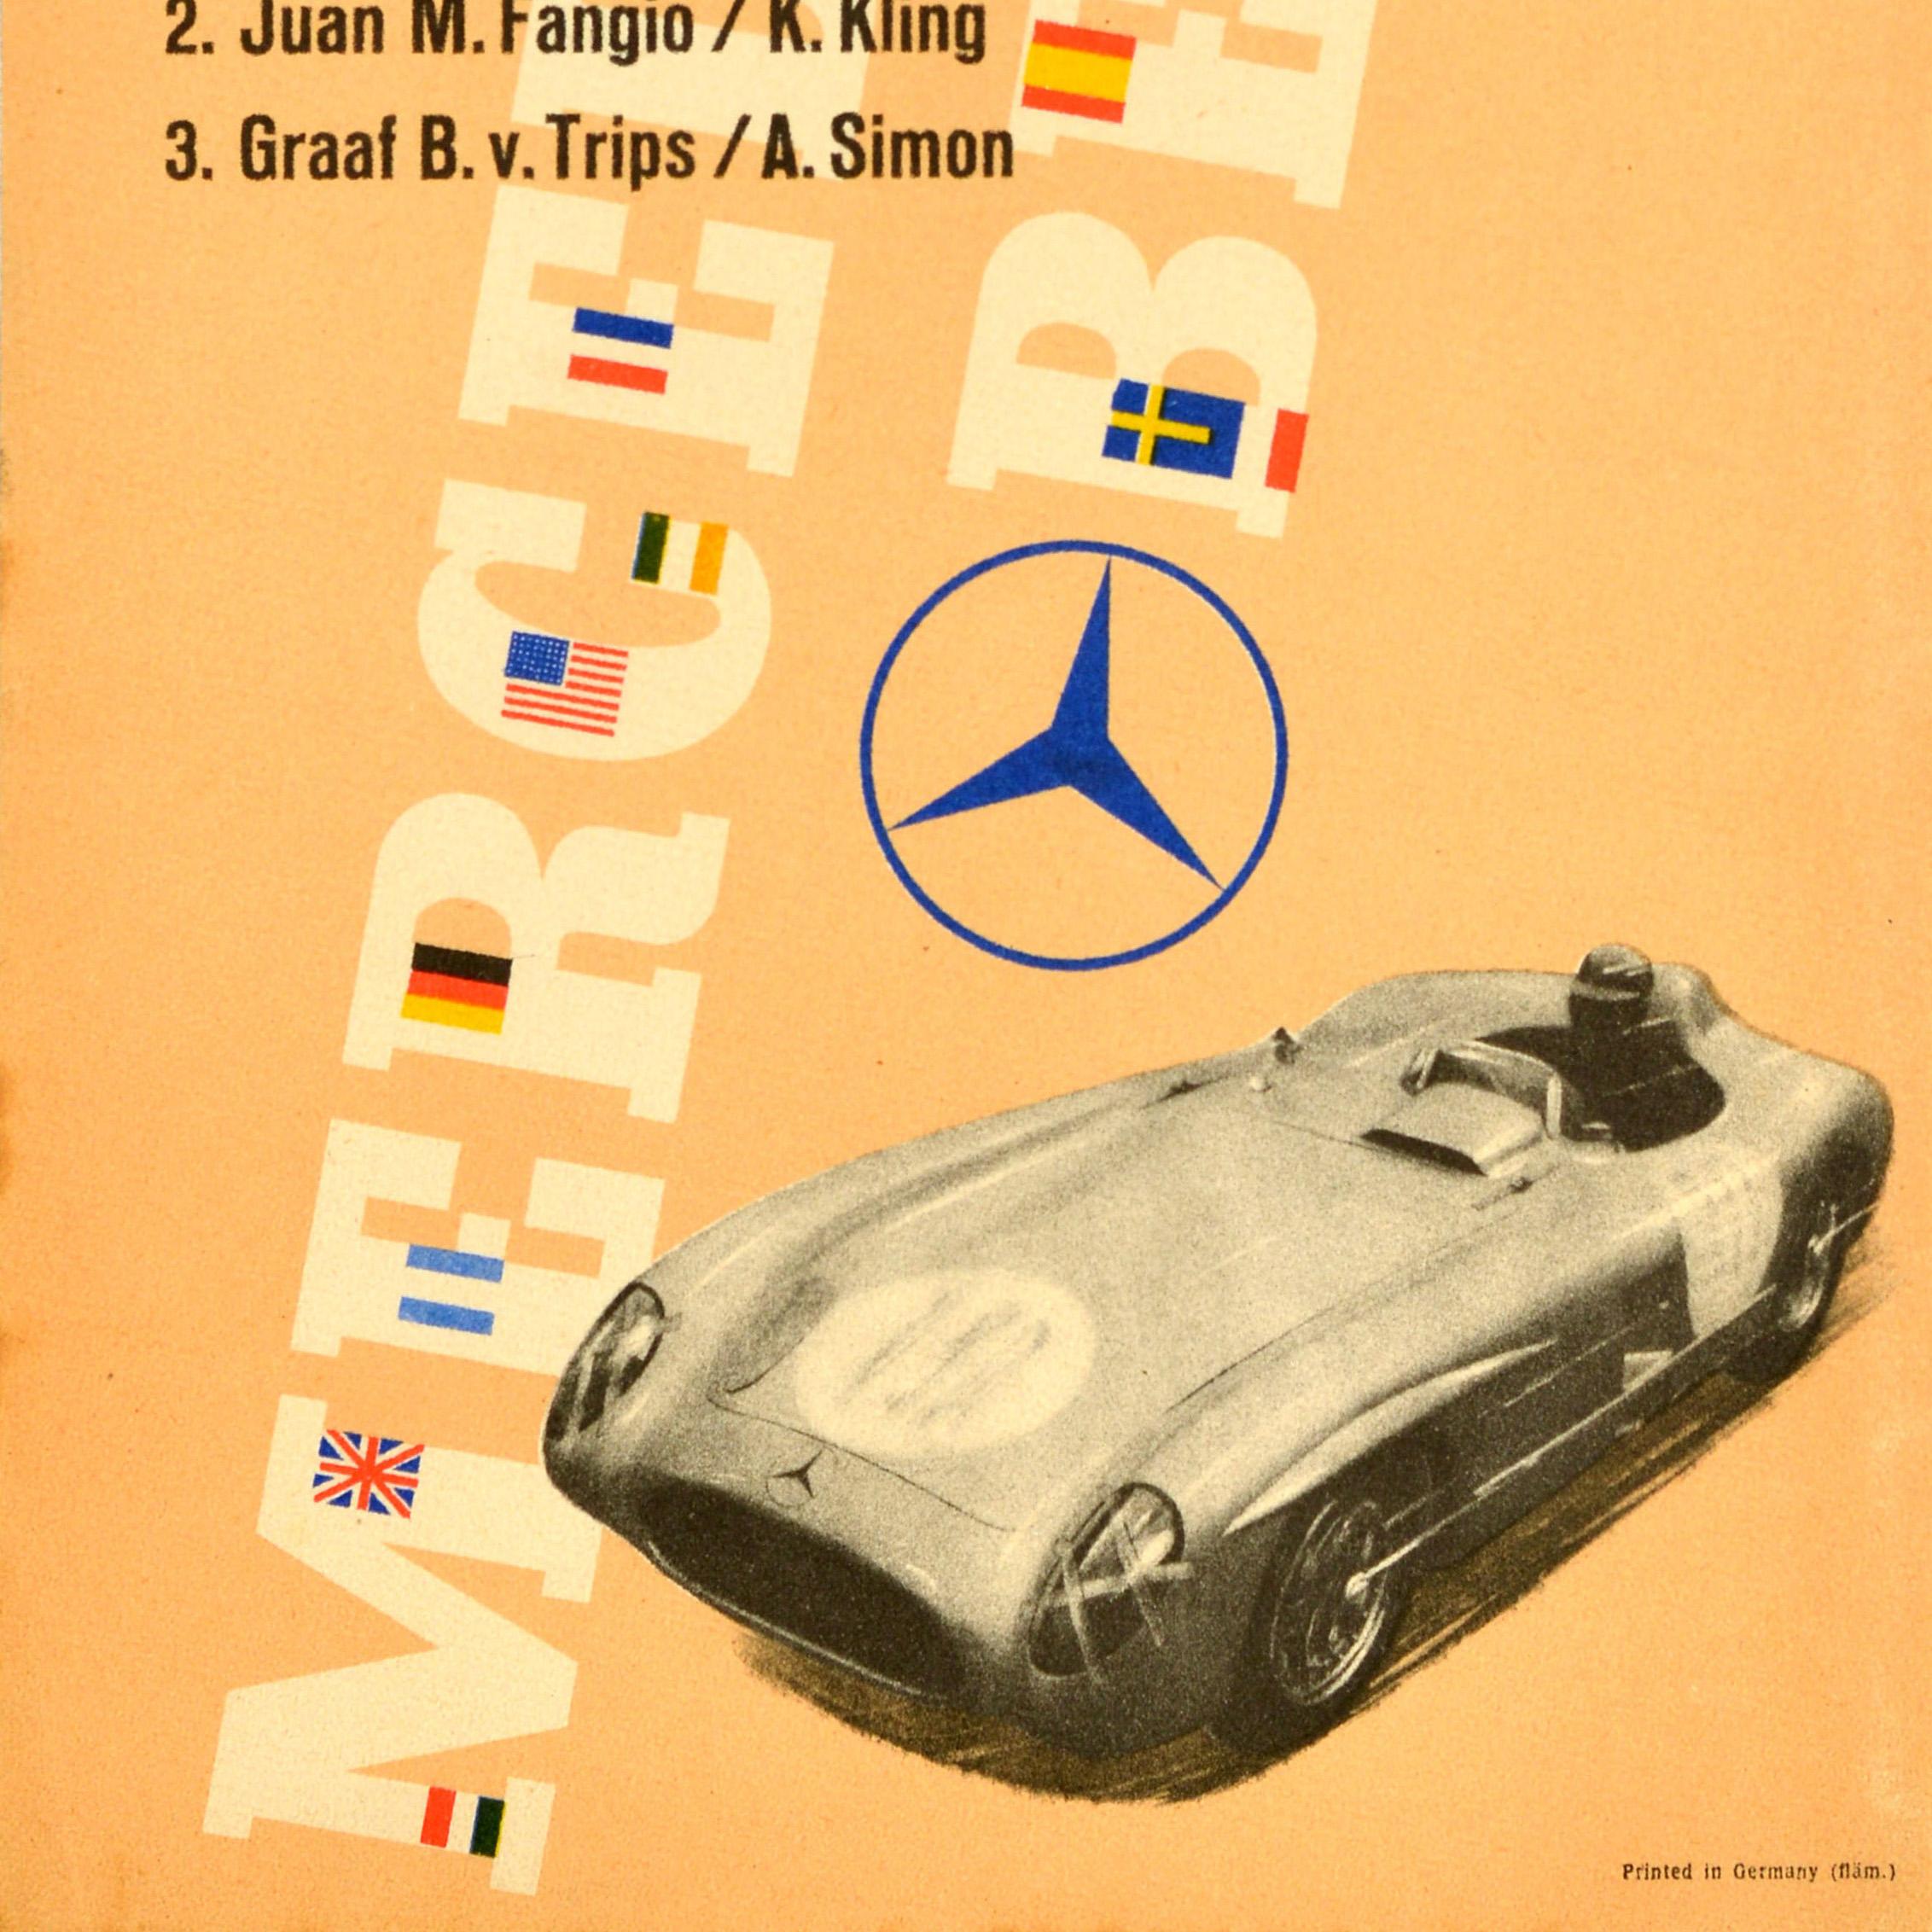 Original vintage car racing poster issued by Mercedes Benz to commemorate their triple victory at the Tourist Trophy Irland / Ireland races in 1955 with a list of the winners: Drievoudige Victorie van de Rensportwagens Racing sports cars (300SLR) 1.